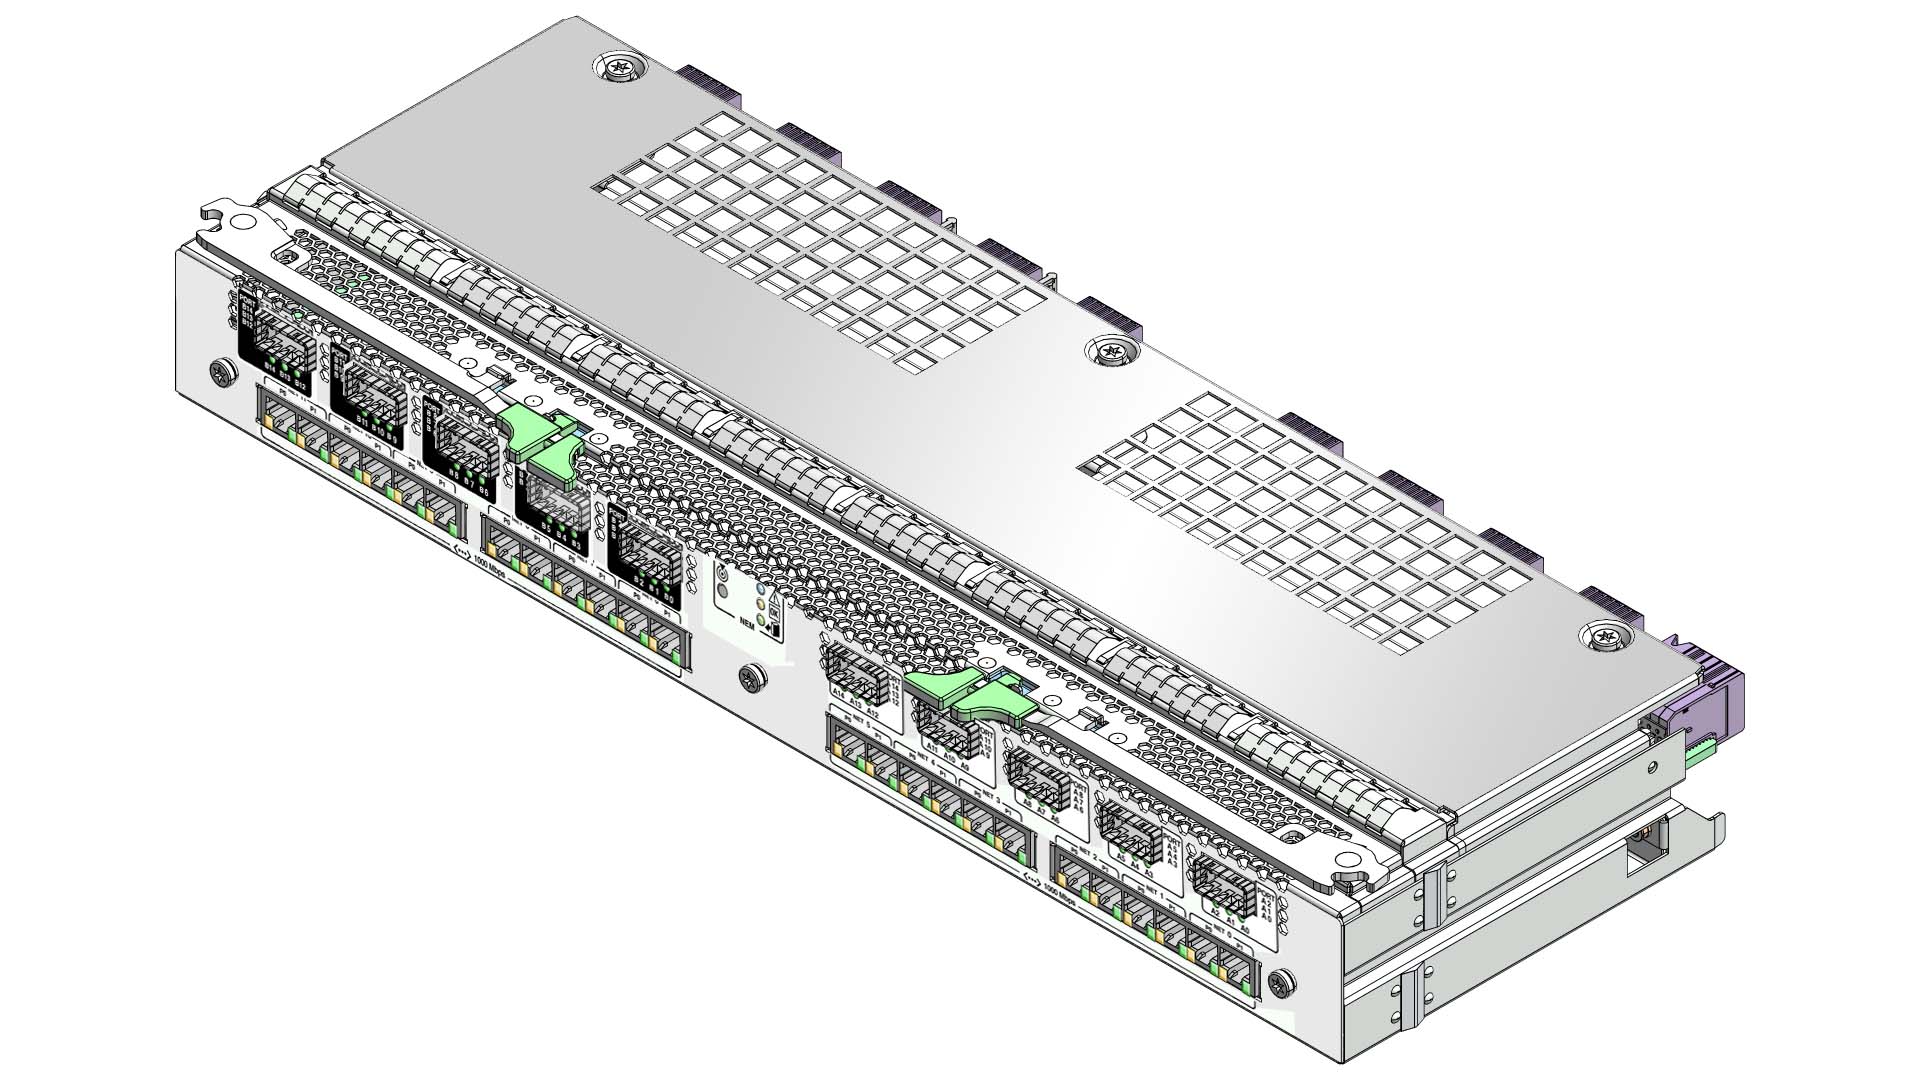 Figure showing the Sun Blade 6048 InfiniBand
QDR Switched Network Express Module